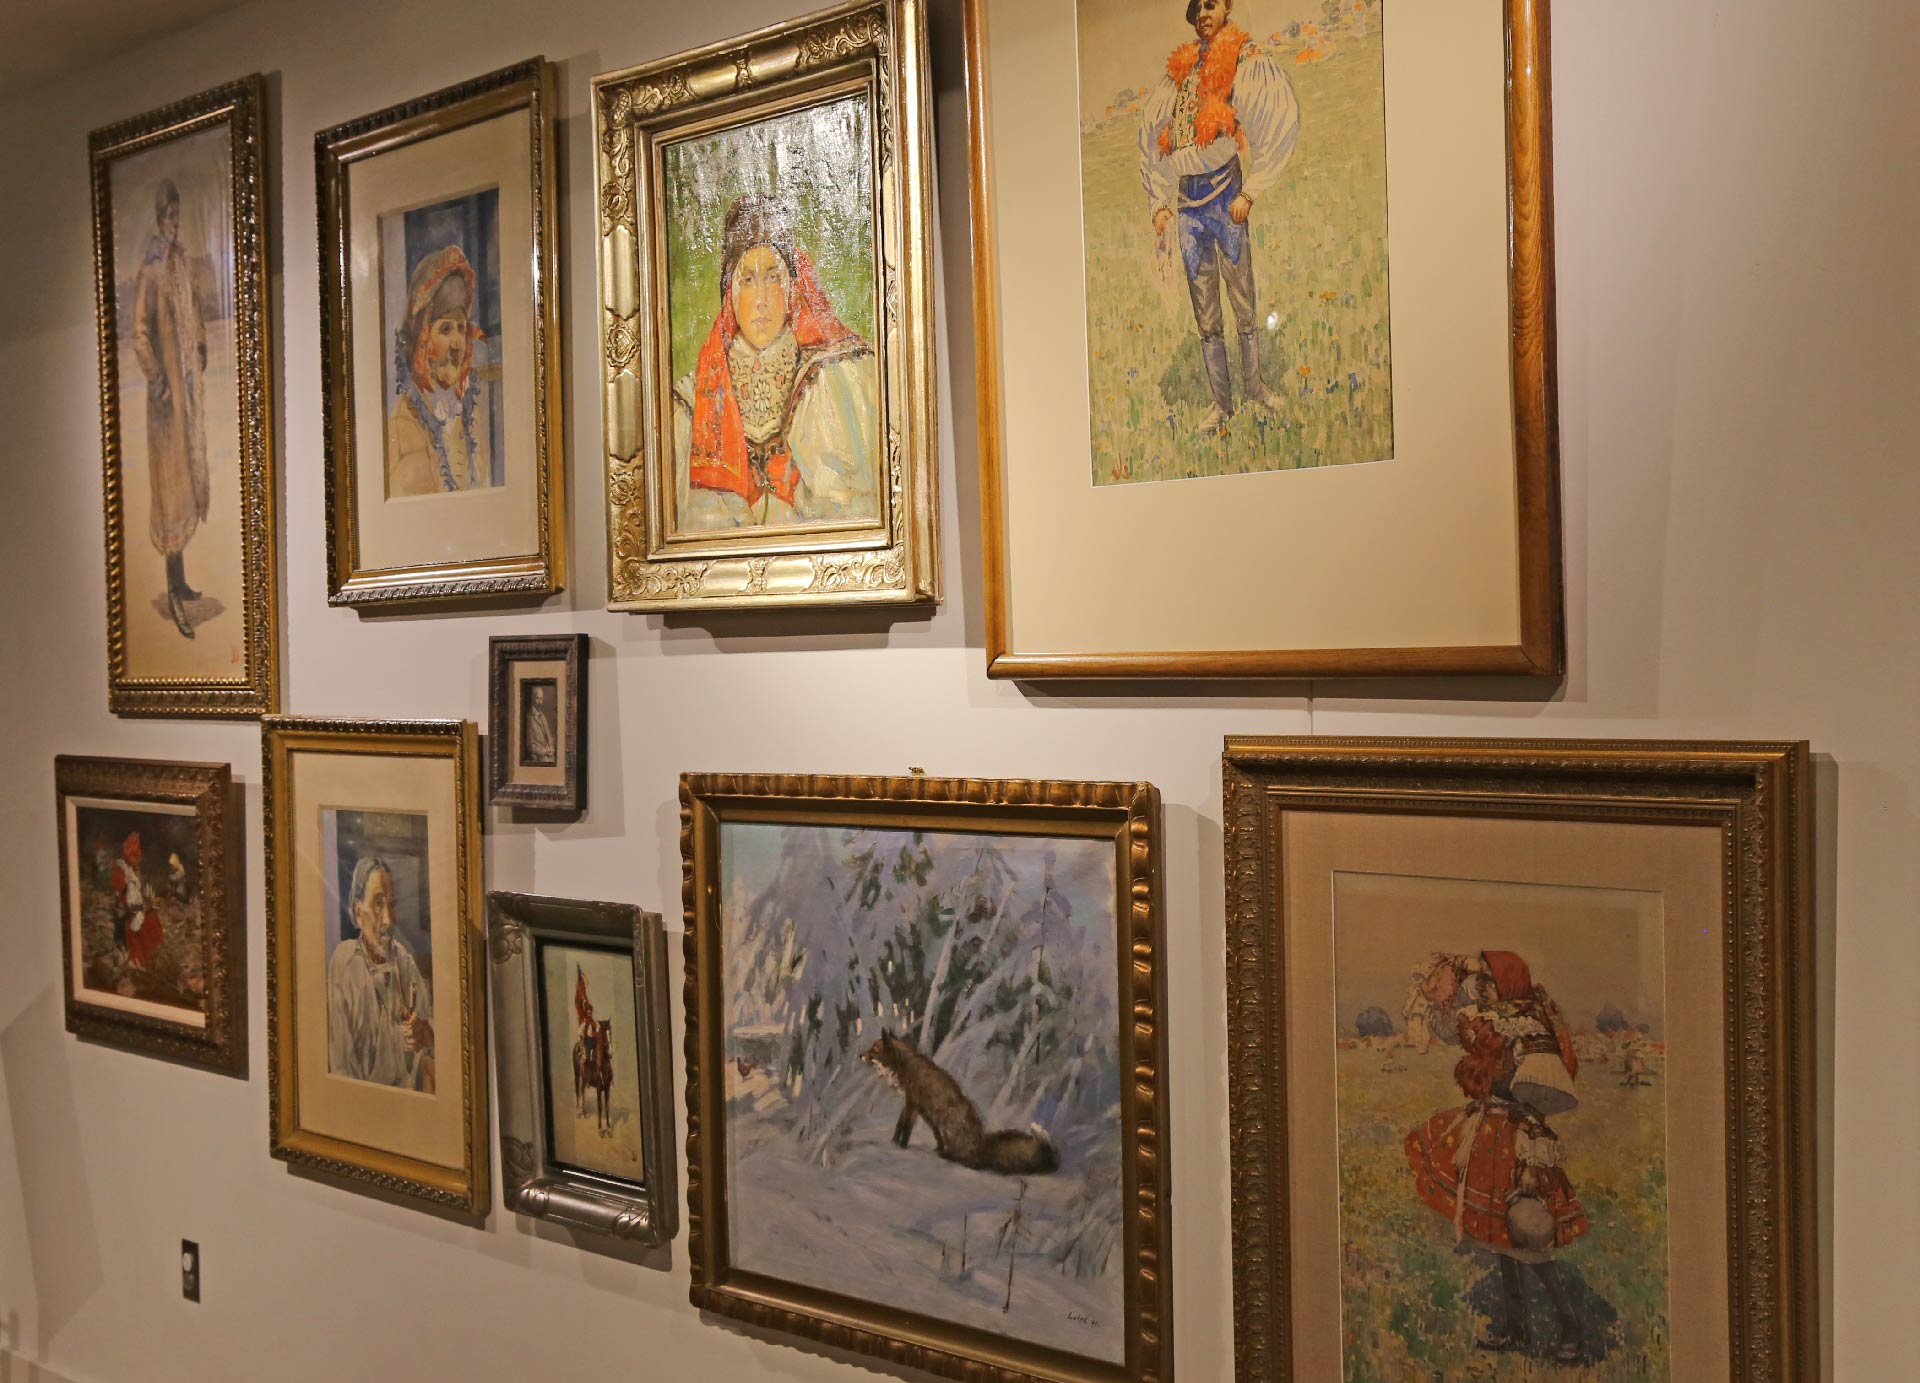 angled view of the paintings in the exhibit